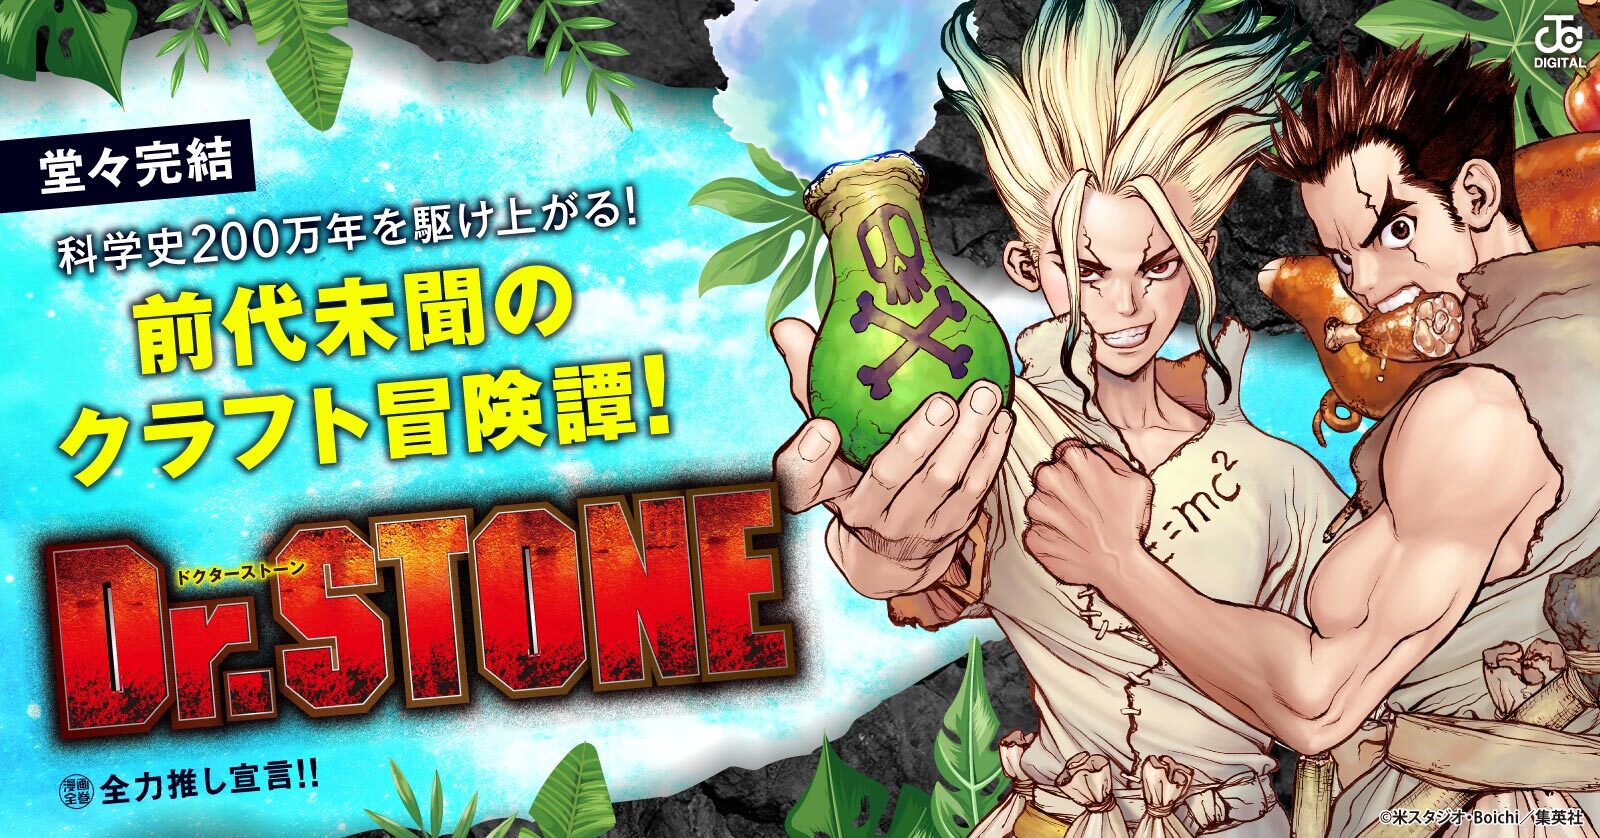 Dr.STONE 27 冊セット 全巻 | 漫画全巻ドットコム